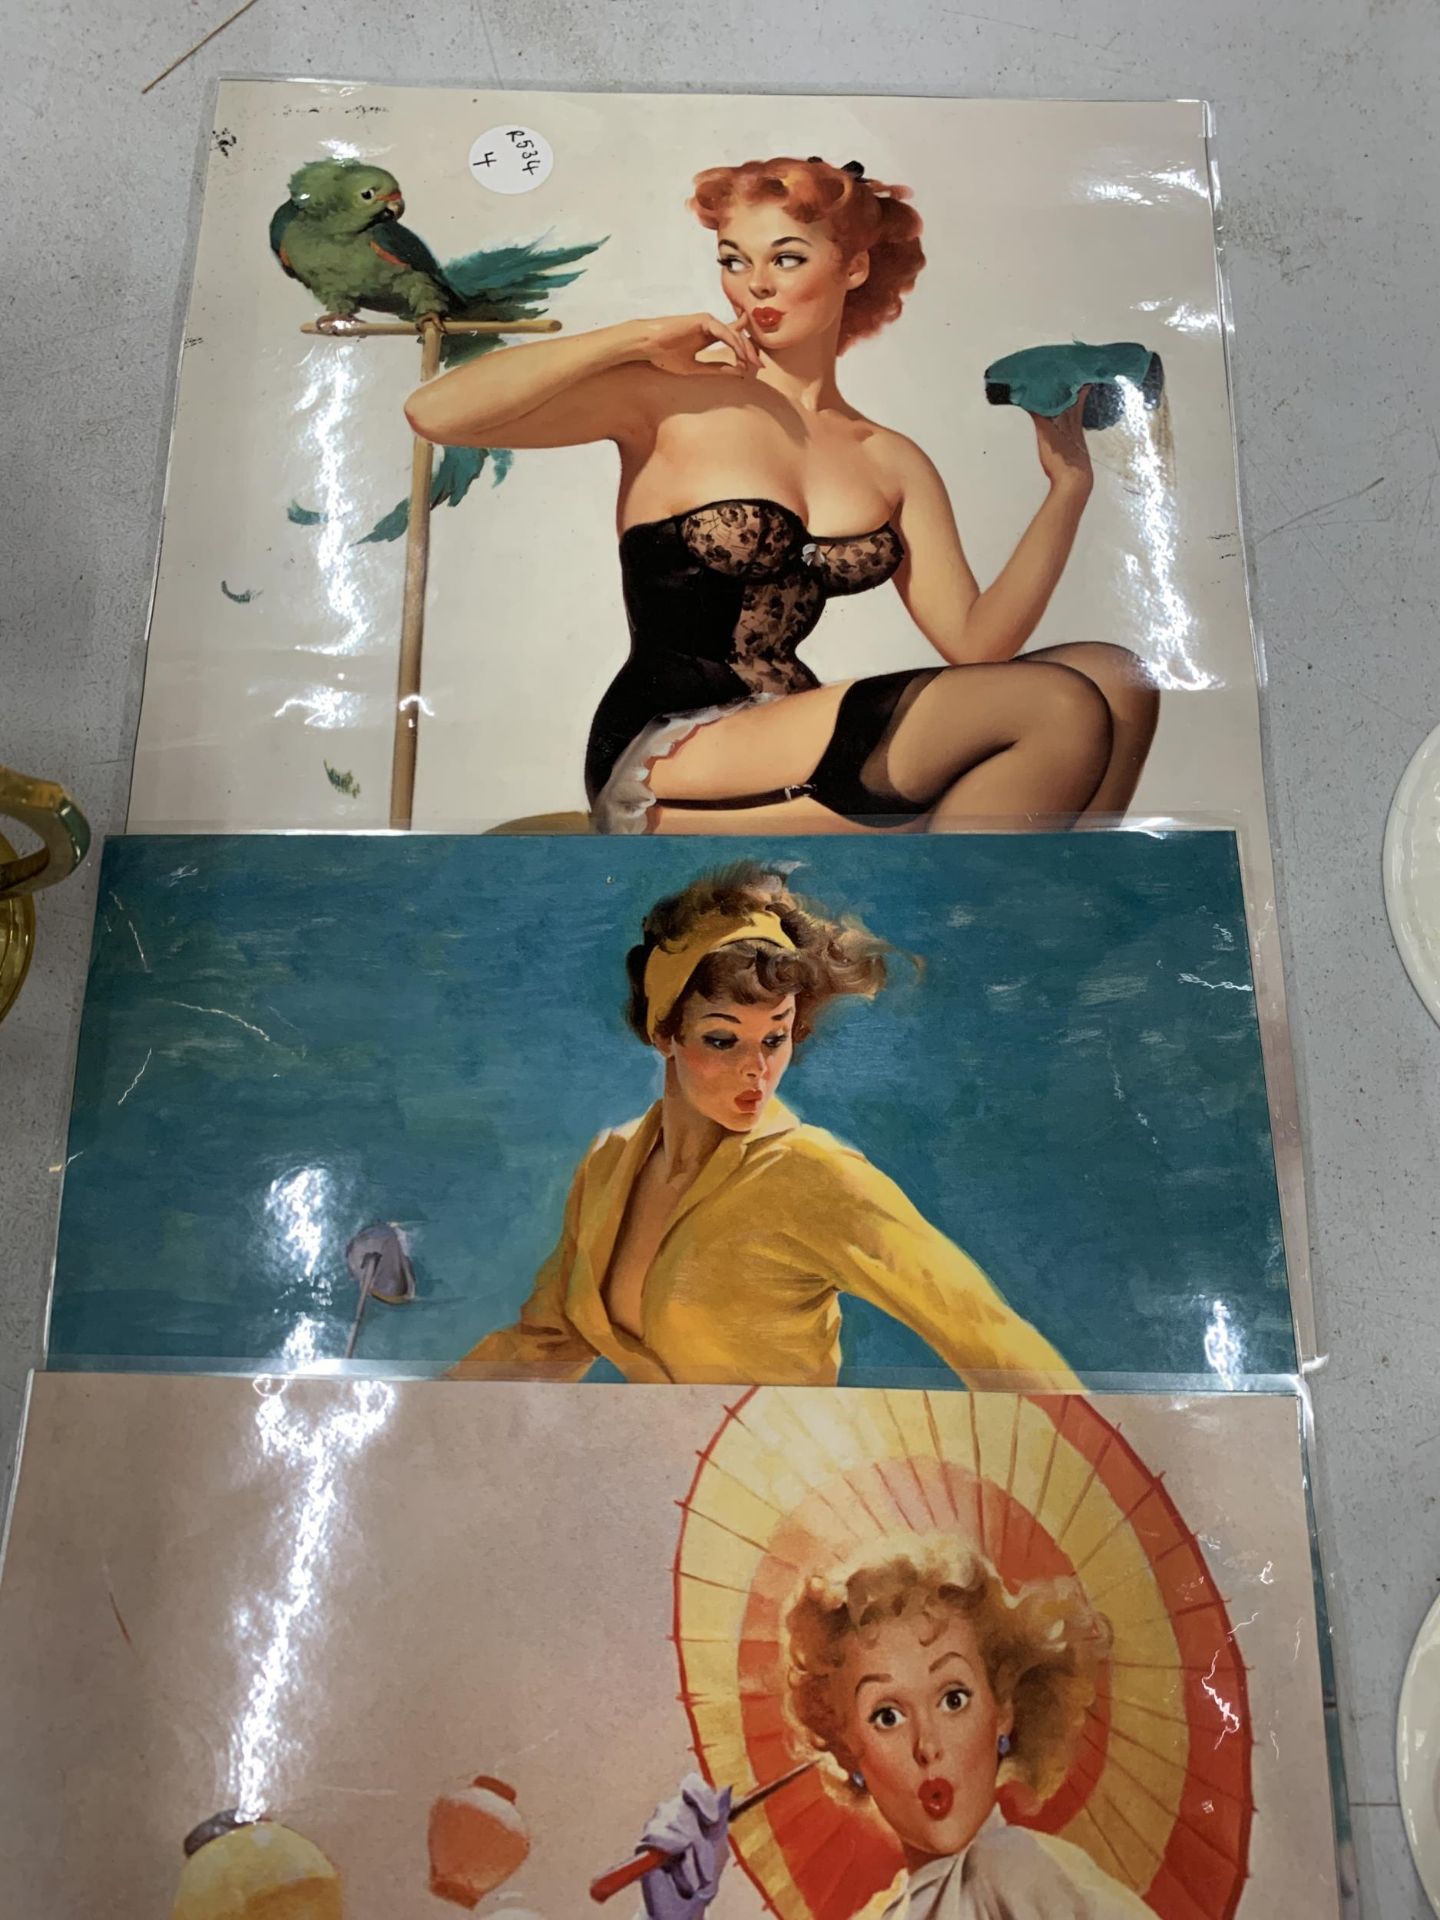 SEVEN VINTAGE PIN-UP GIRL PRINTS BY THE FRENCH ARTIST GIL ELVGREN - Image 5 of 5